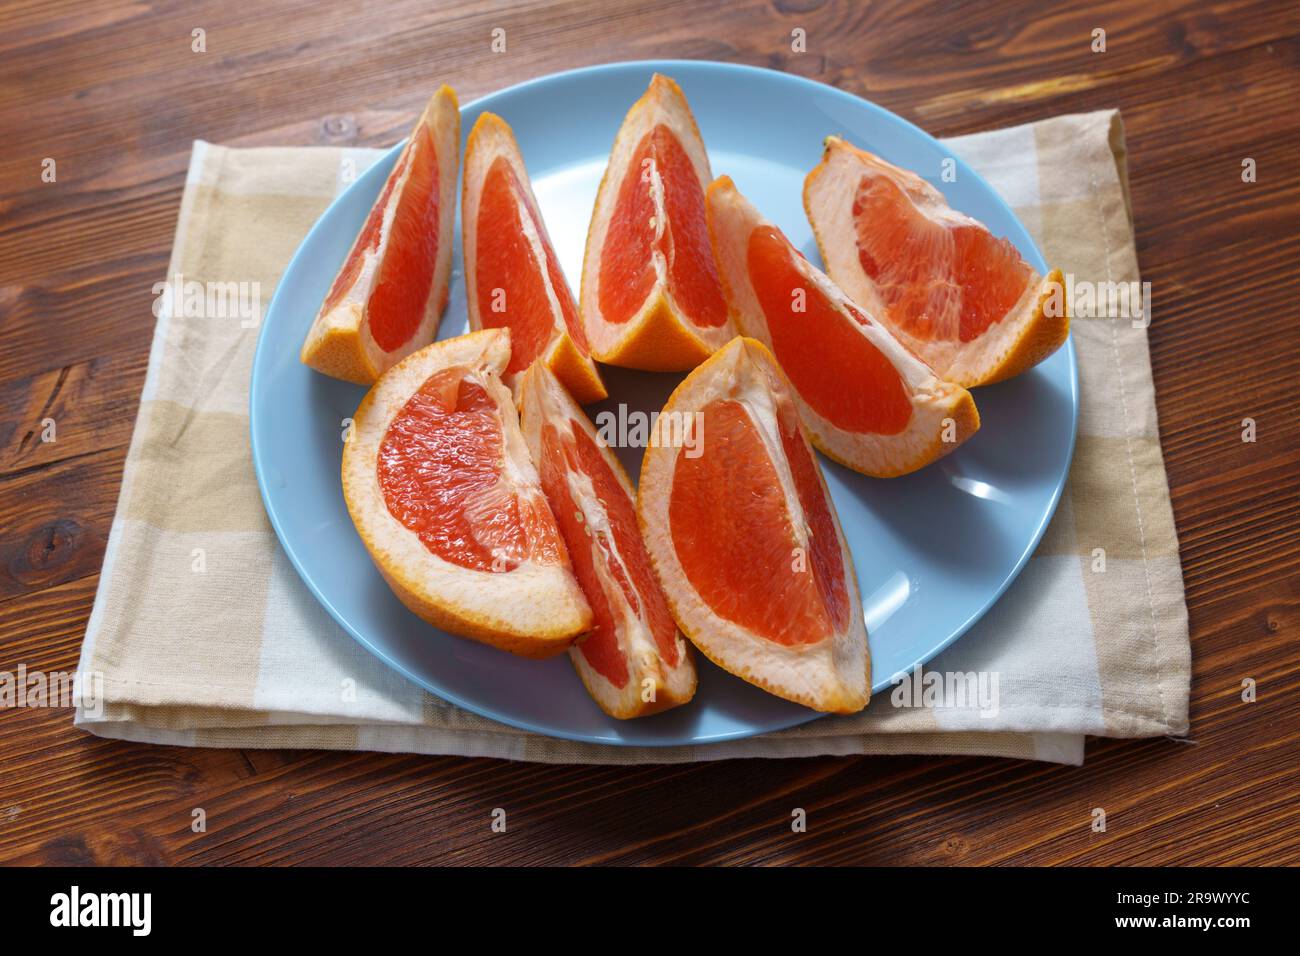 Cutting ripe grapefruit on board flat lay. Citrus fruits, making fresh juice or tropical cocktails Stock Photo